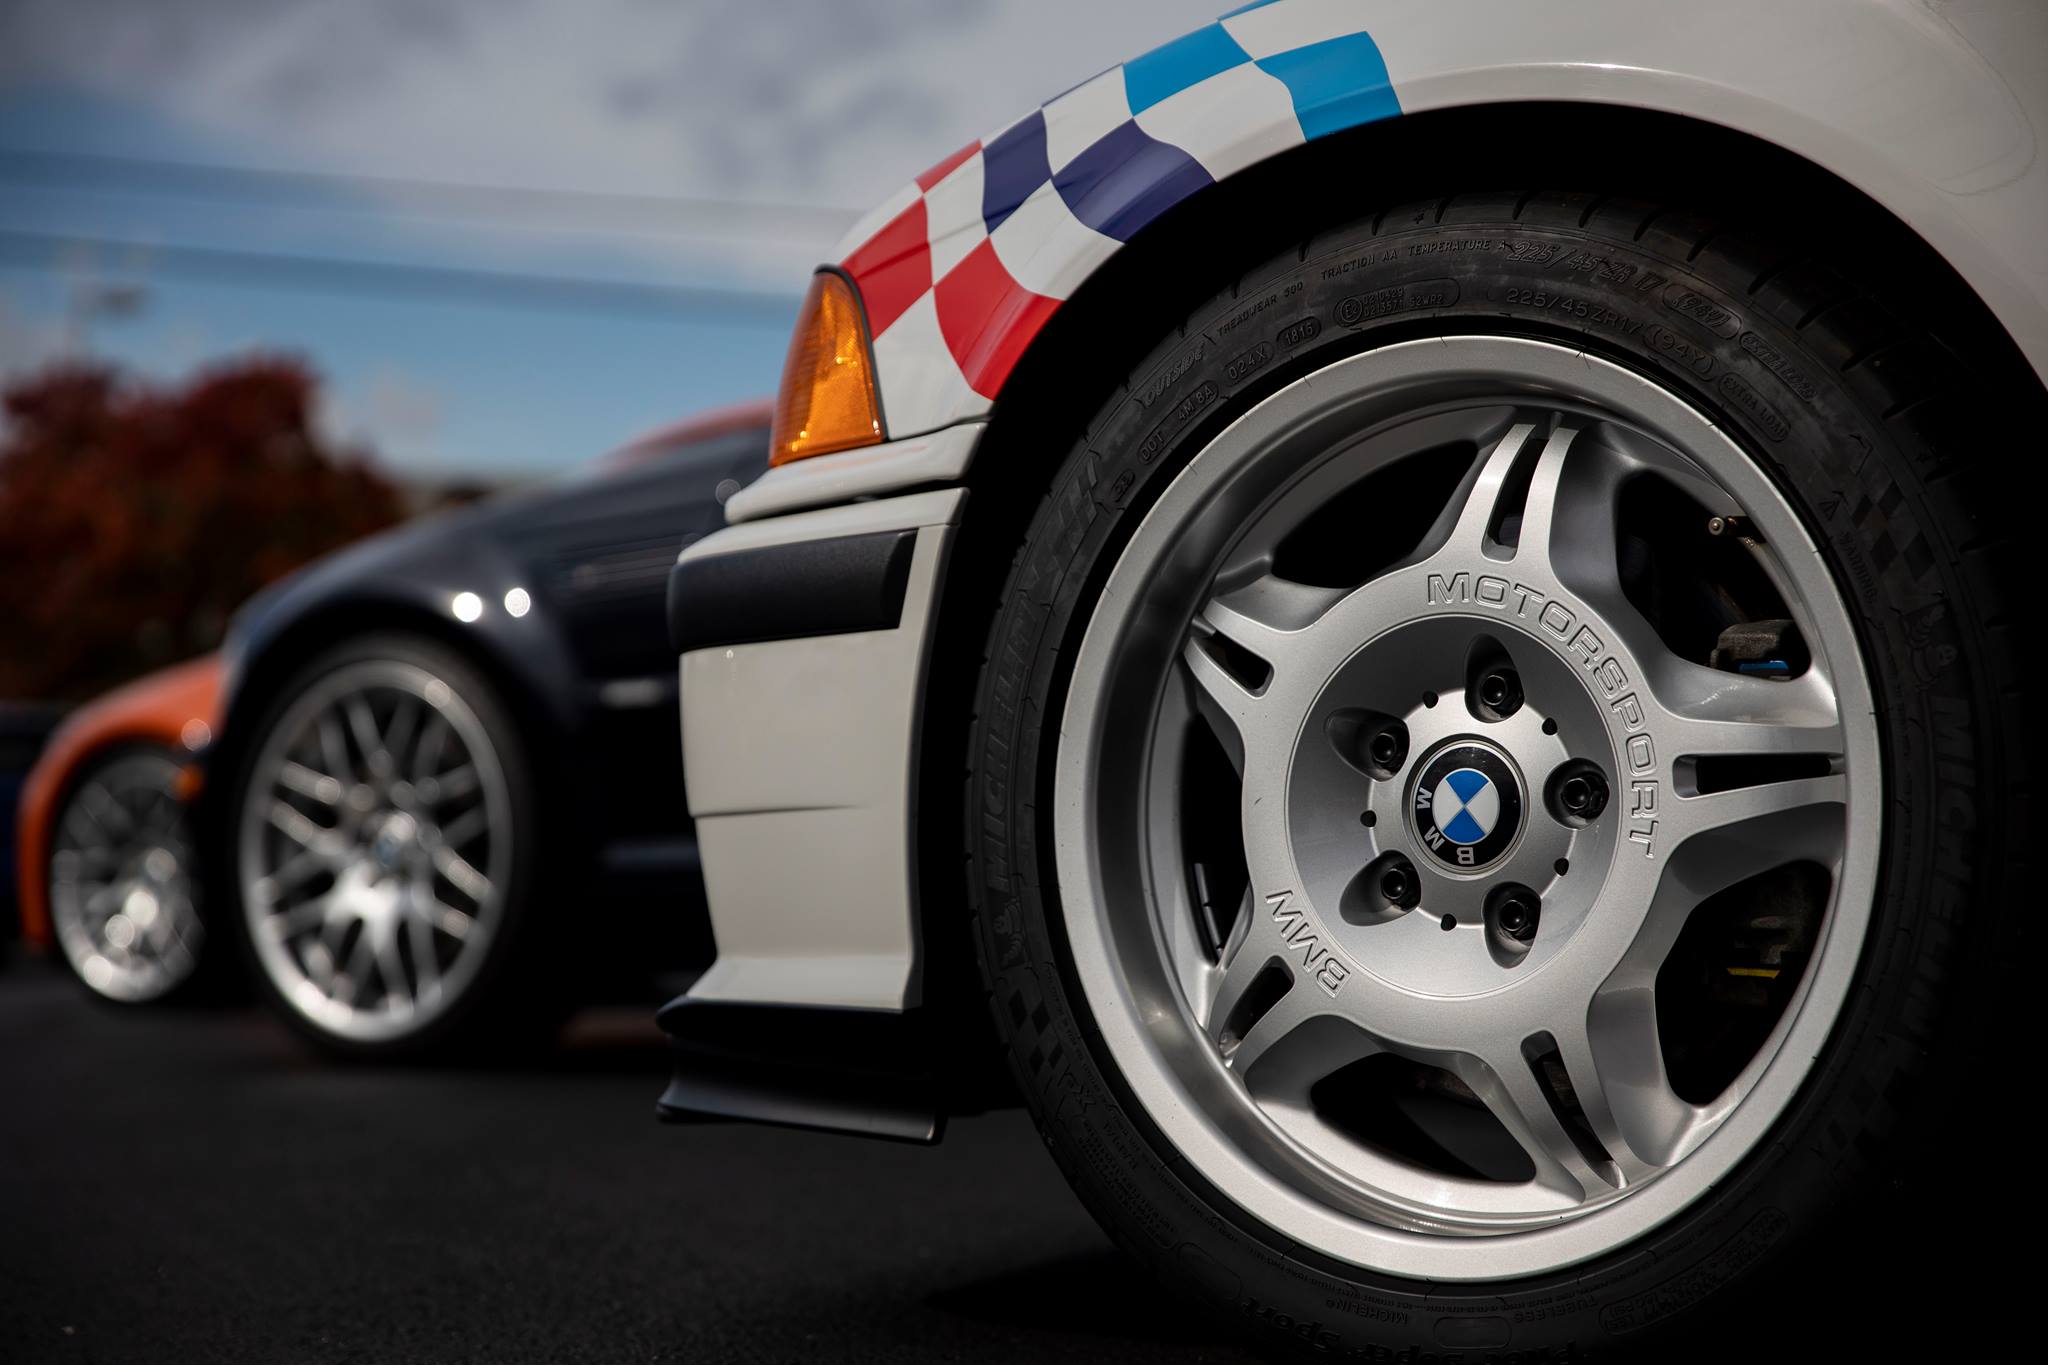 Paging all BMW fans: You're going to want to see this collection. | Enthusiast Auto Group photos